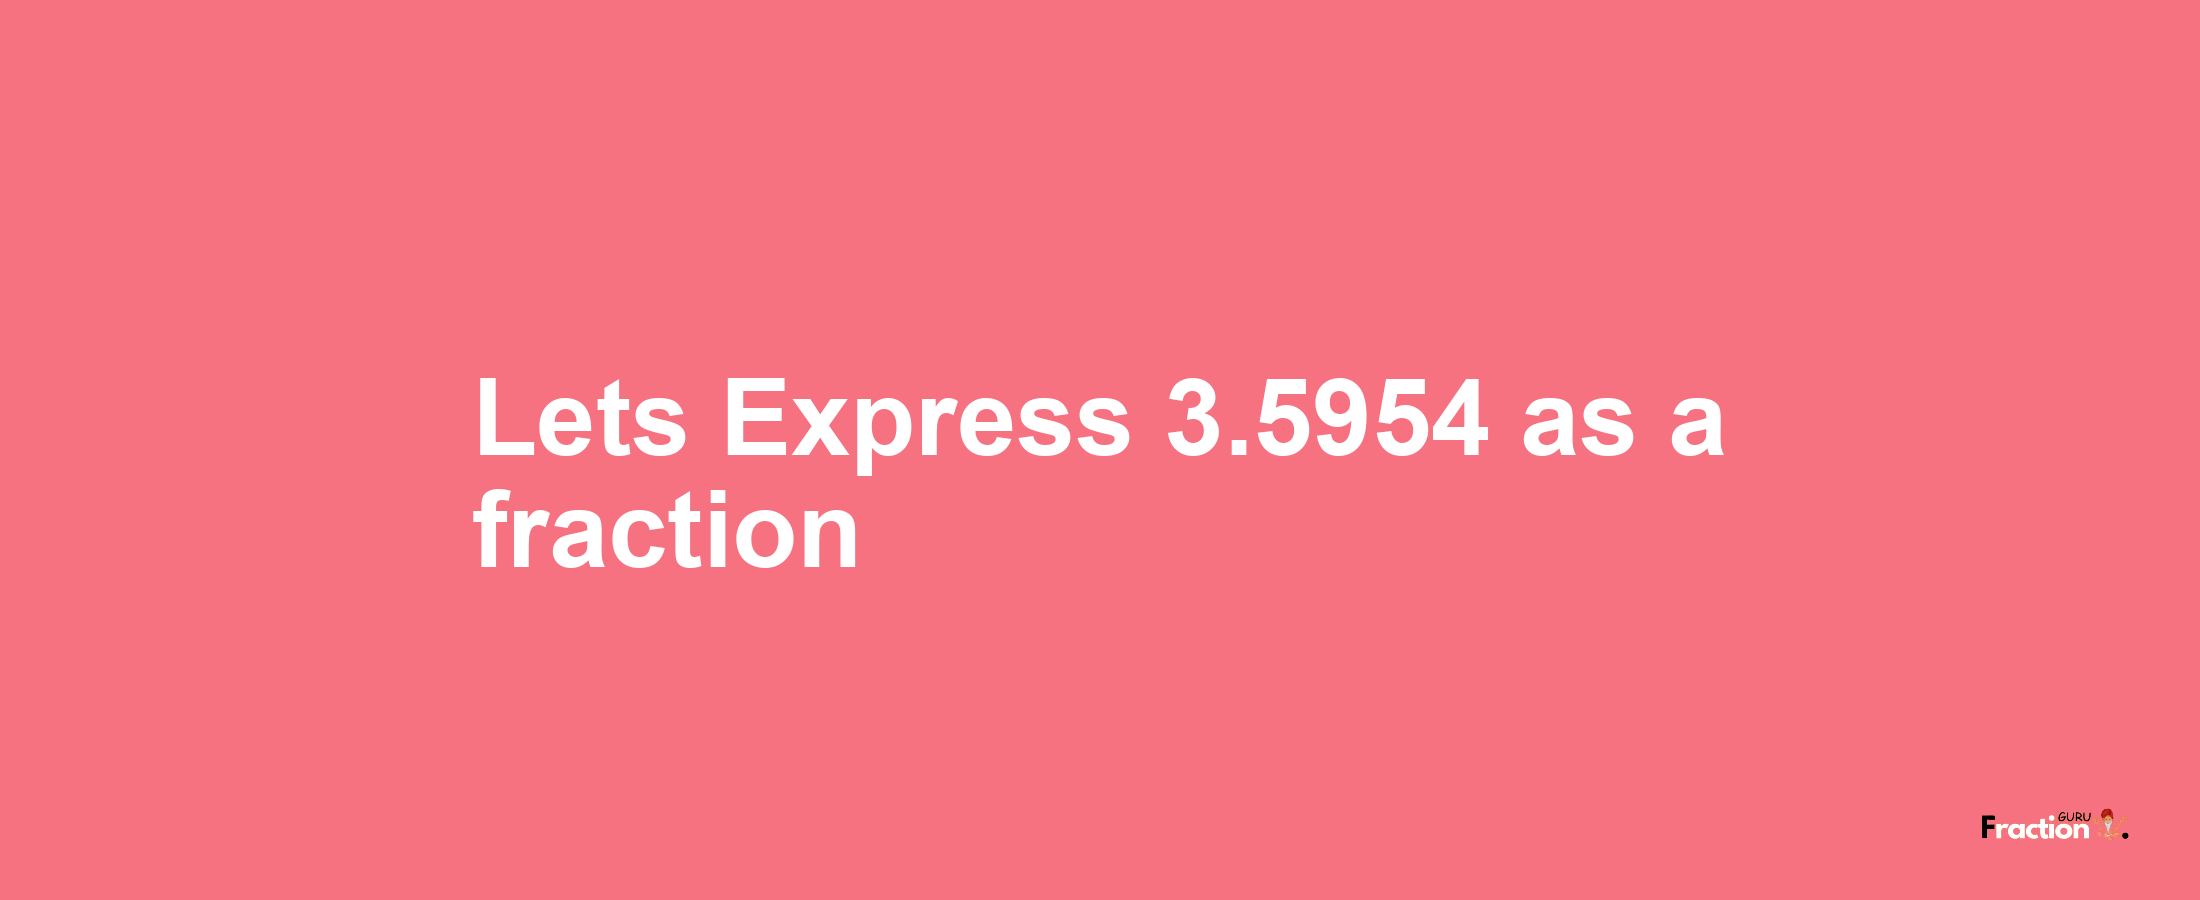 Lets Express 3.5954 as afraction